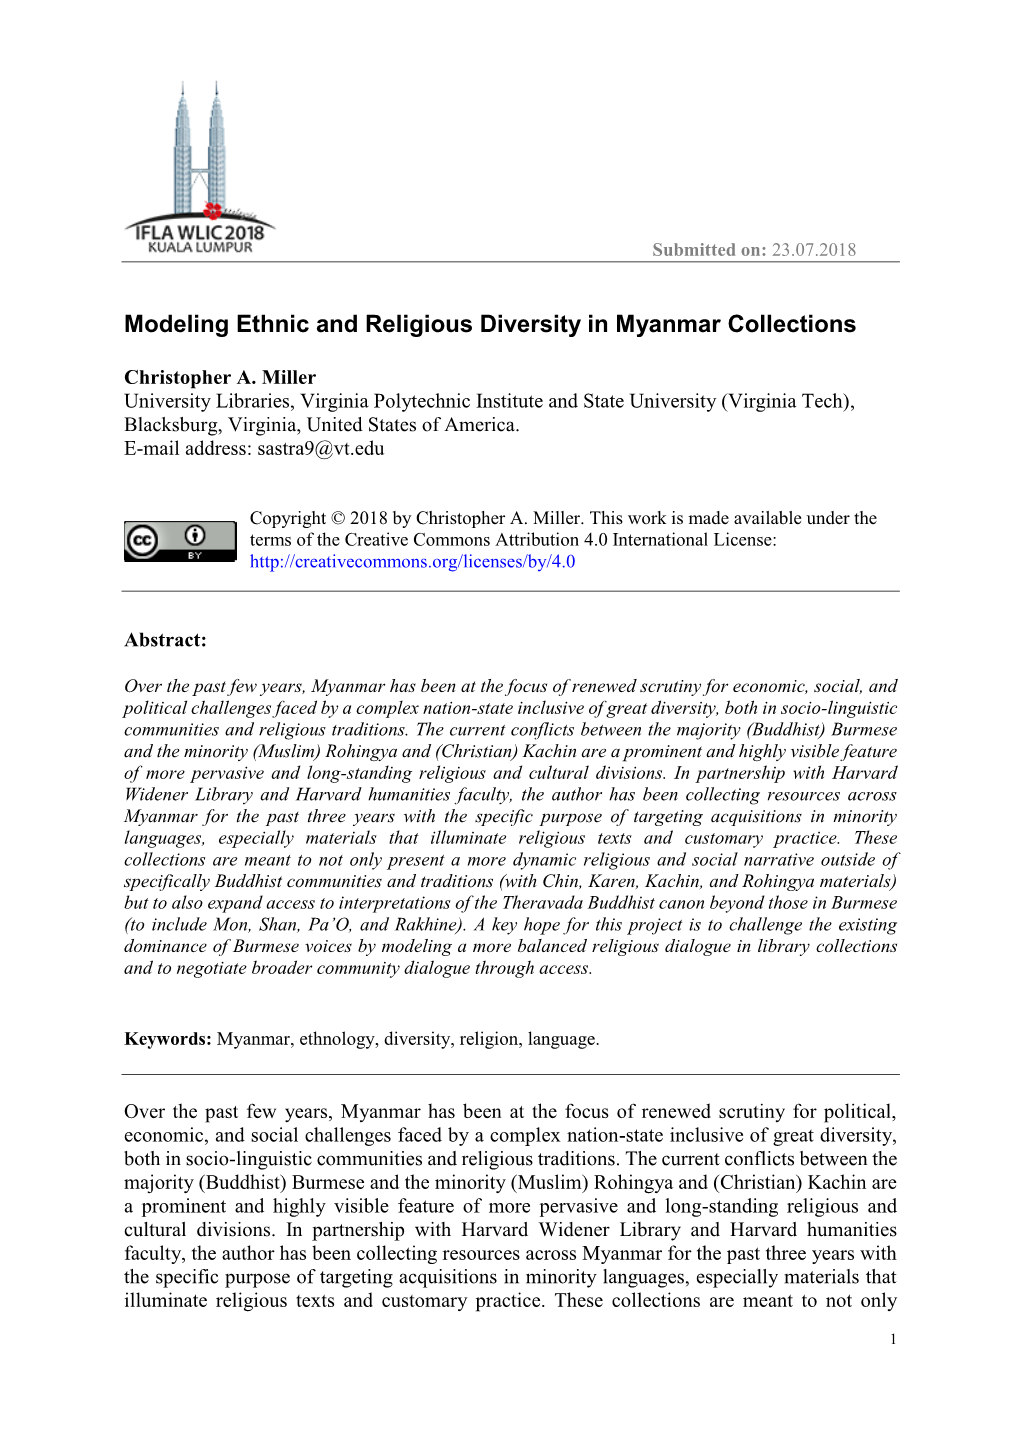 Modeling Ethnic and Religious Diversity in Myanmar Collections